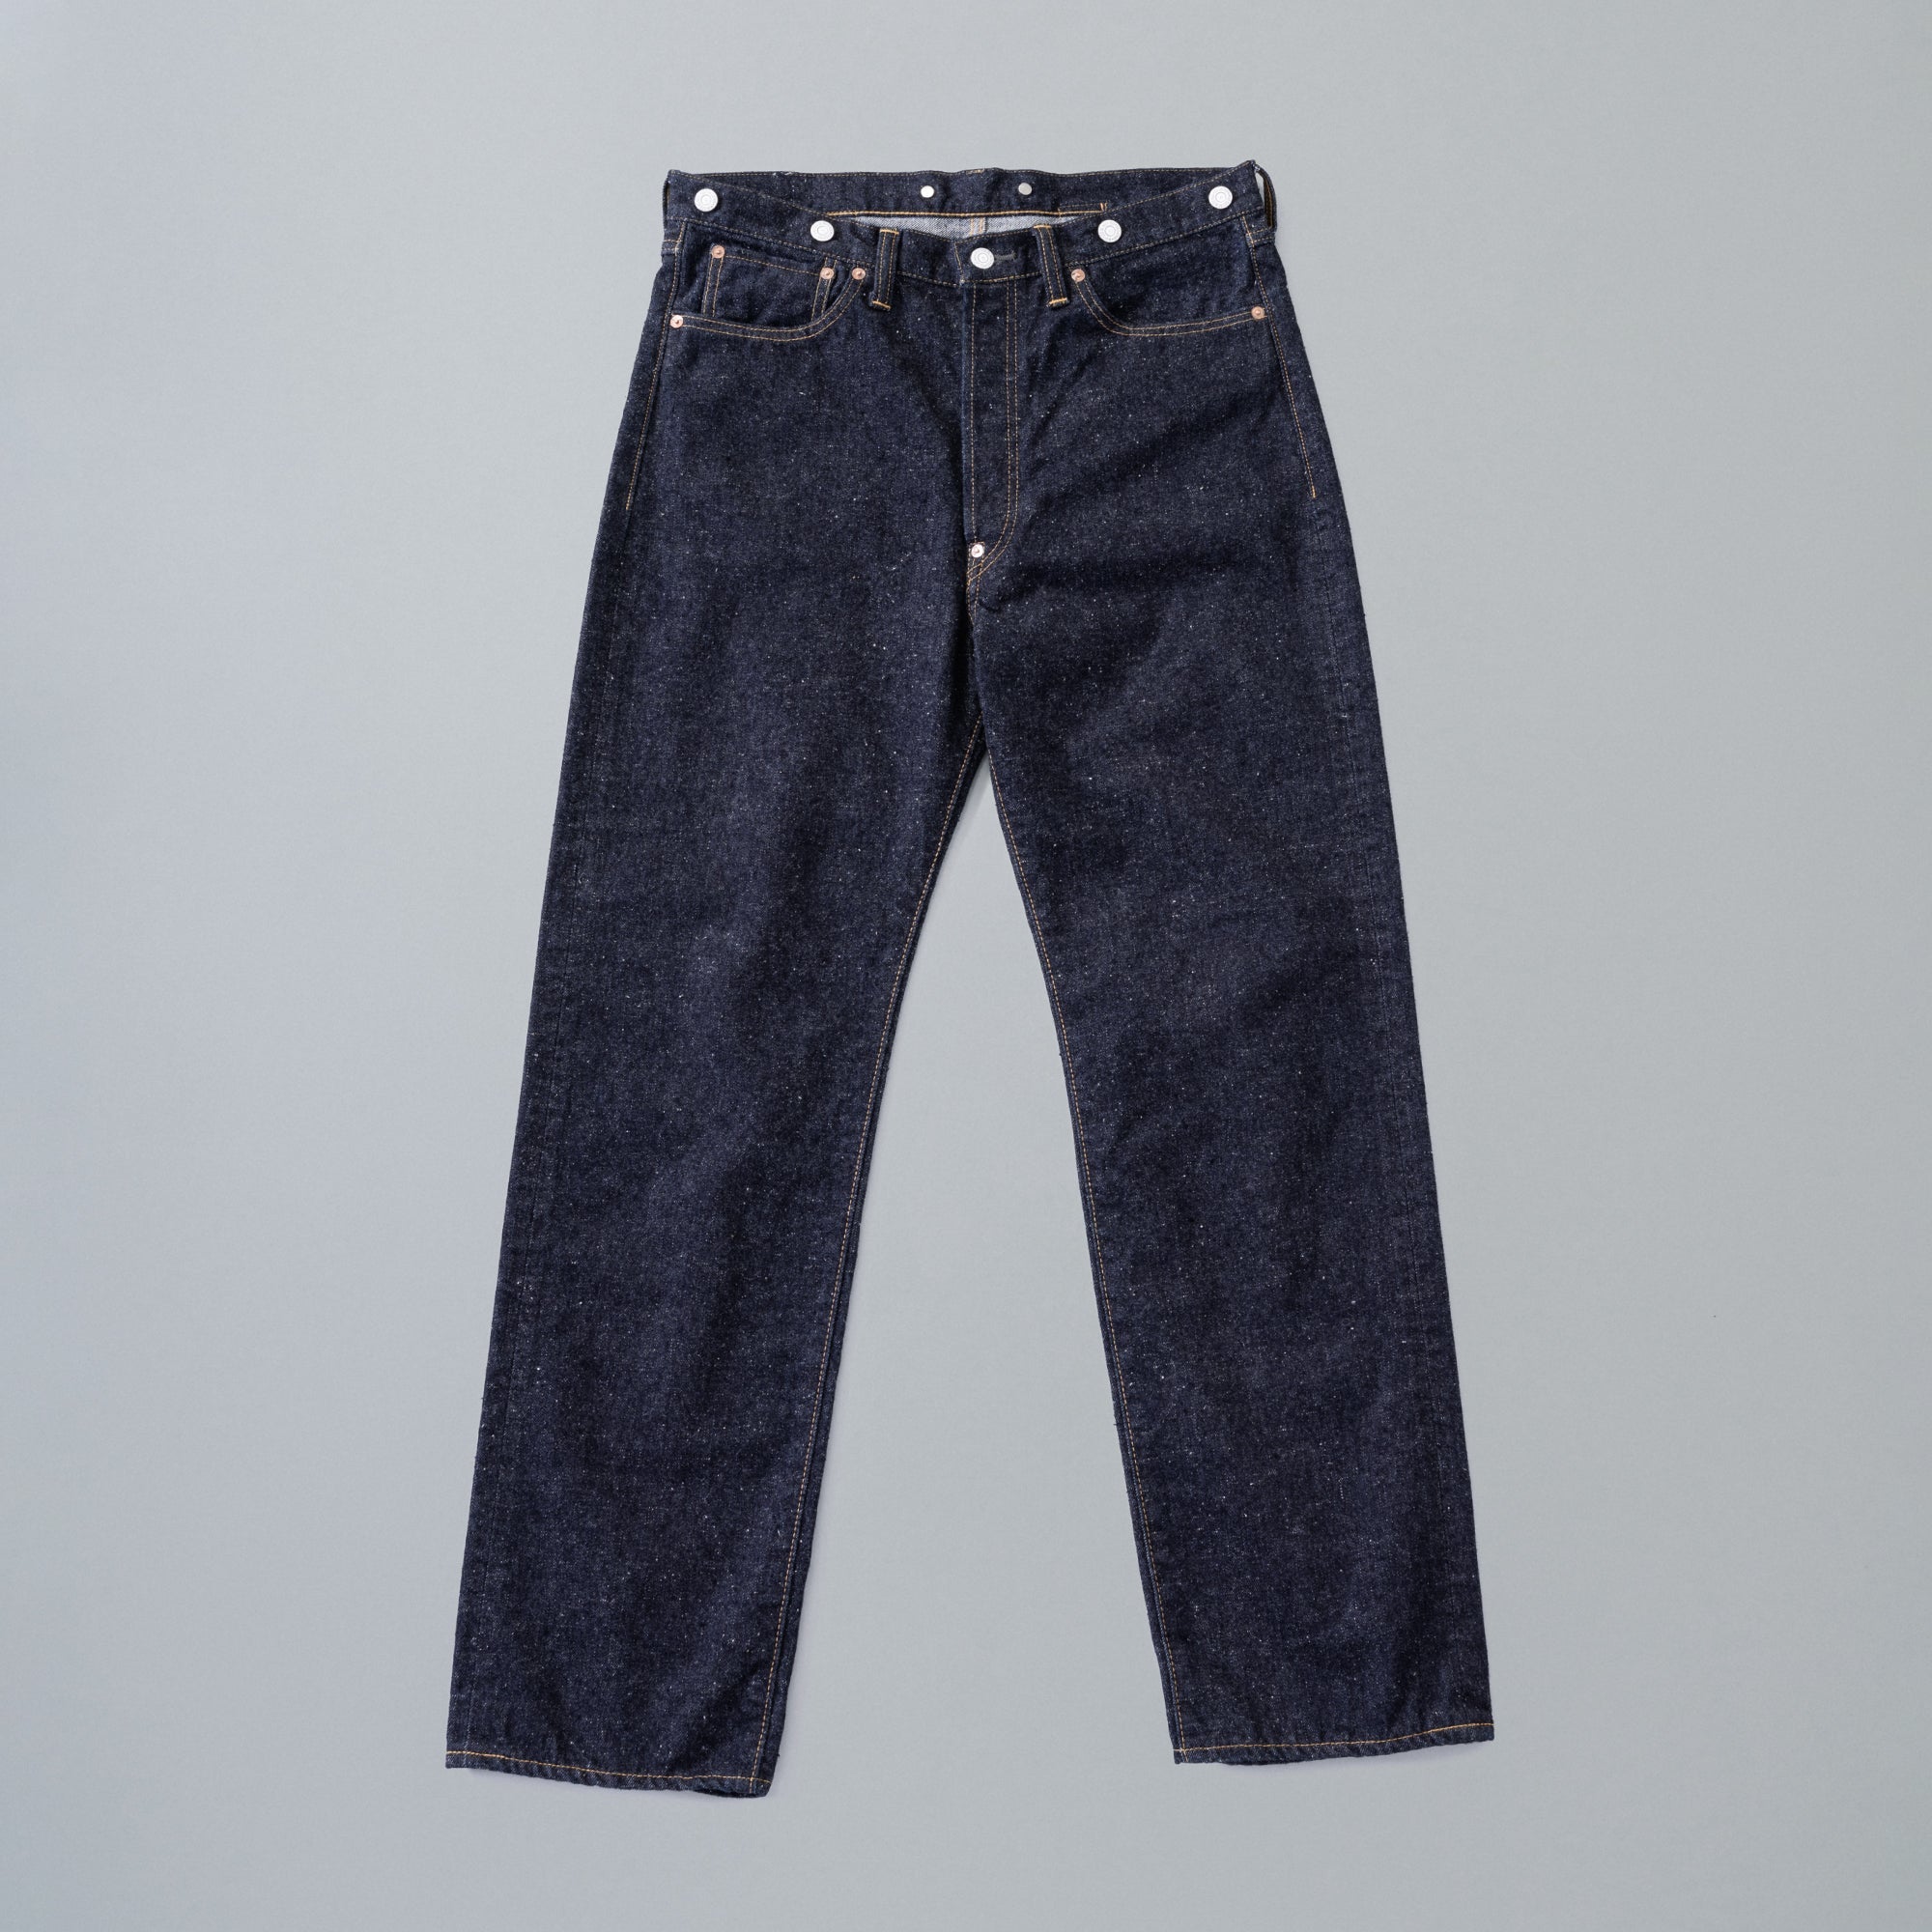 New Manual 002 LV JEANS ONE-WASHED 36